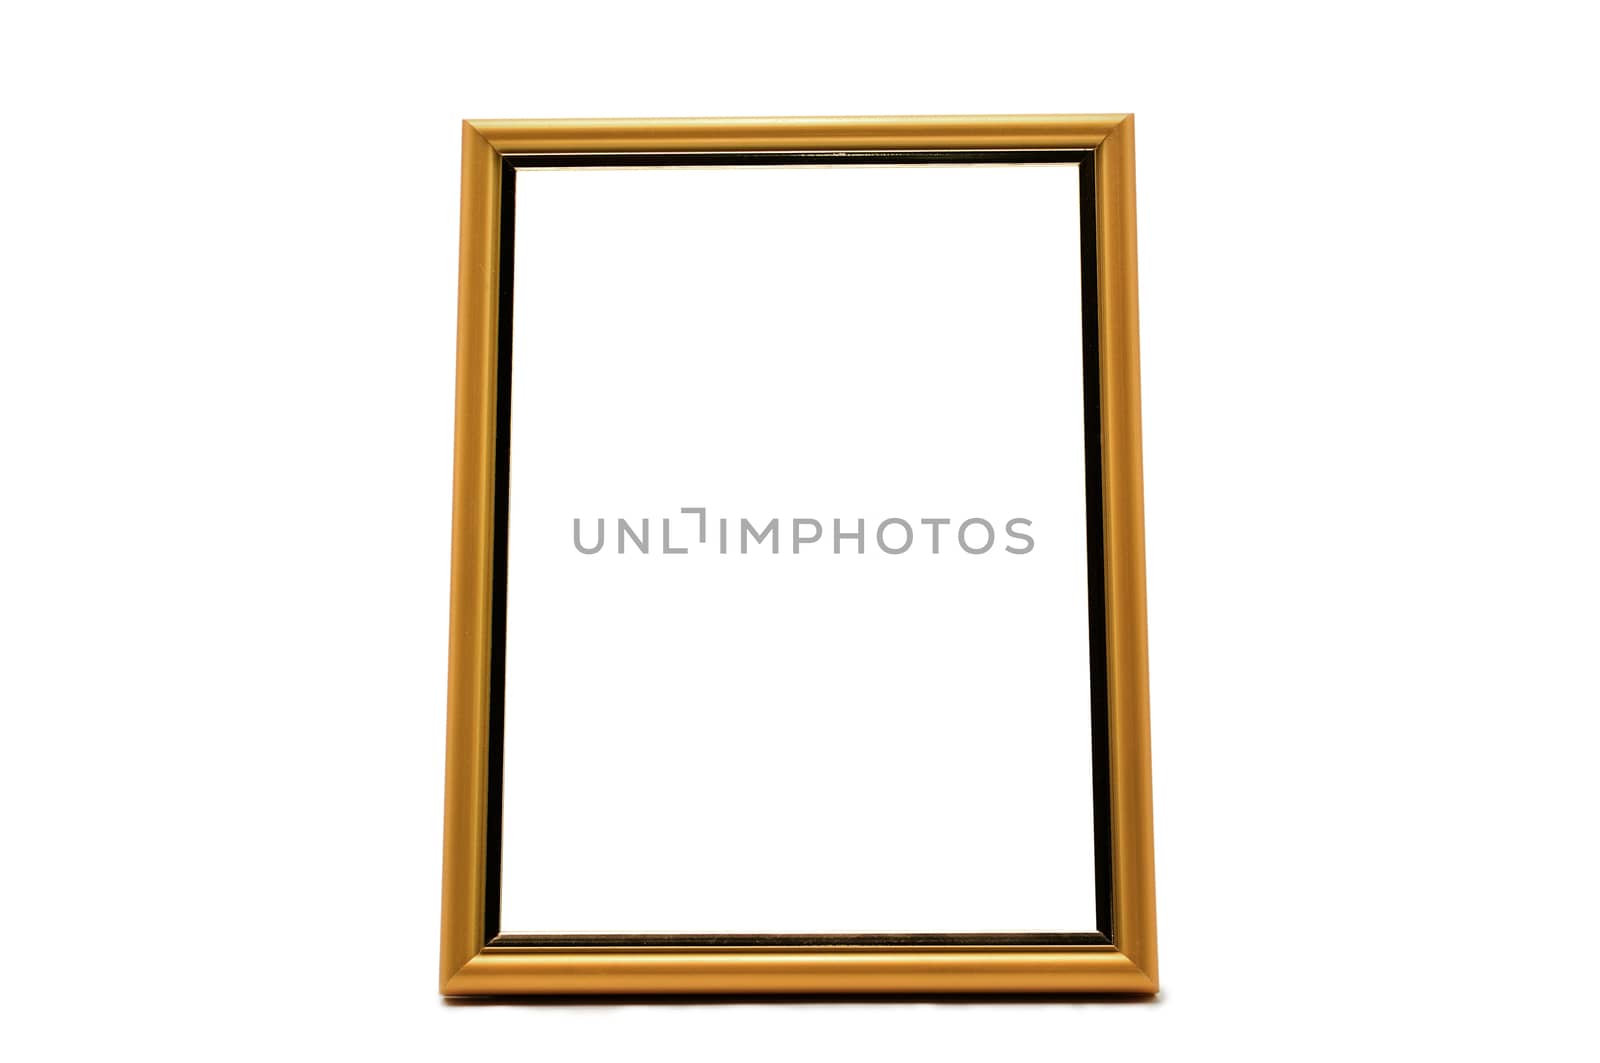 Vintage wooden and golden photo frame on an isolated white background
